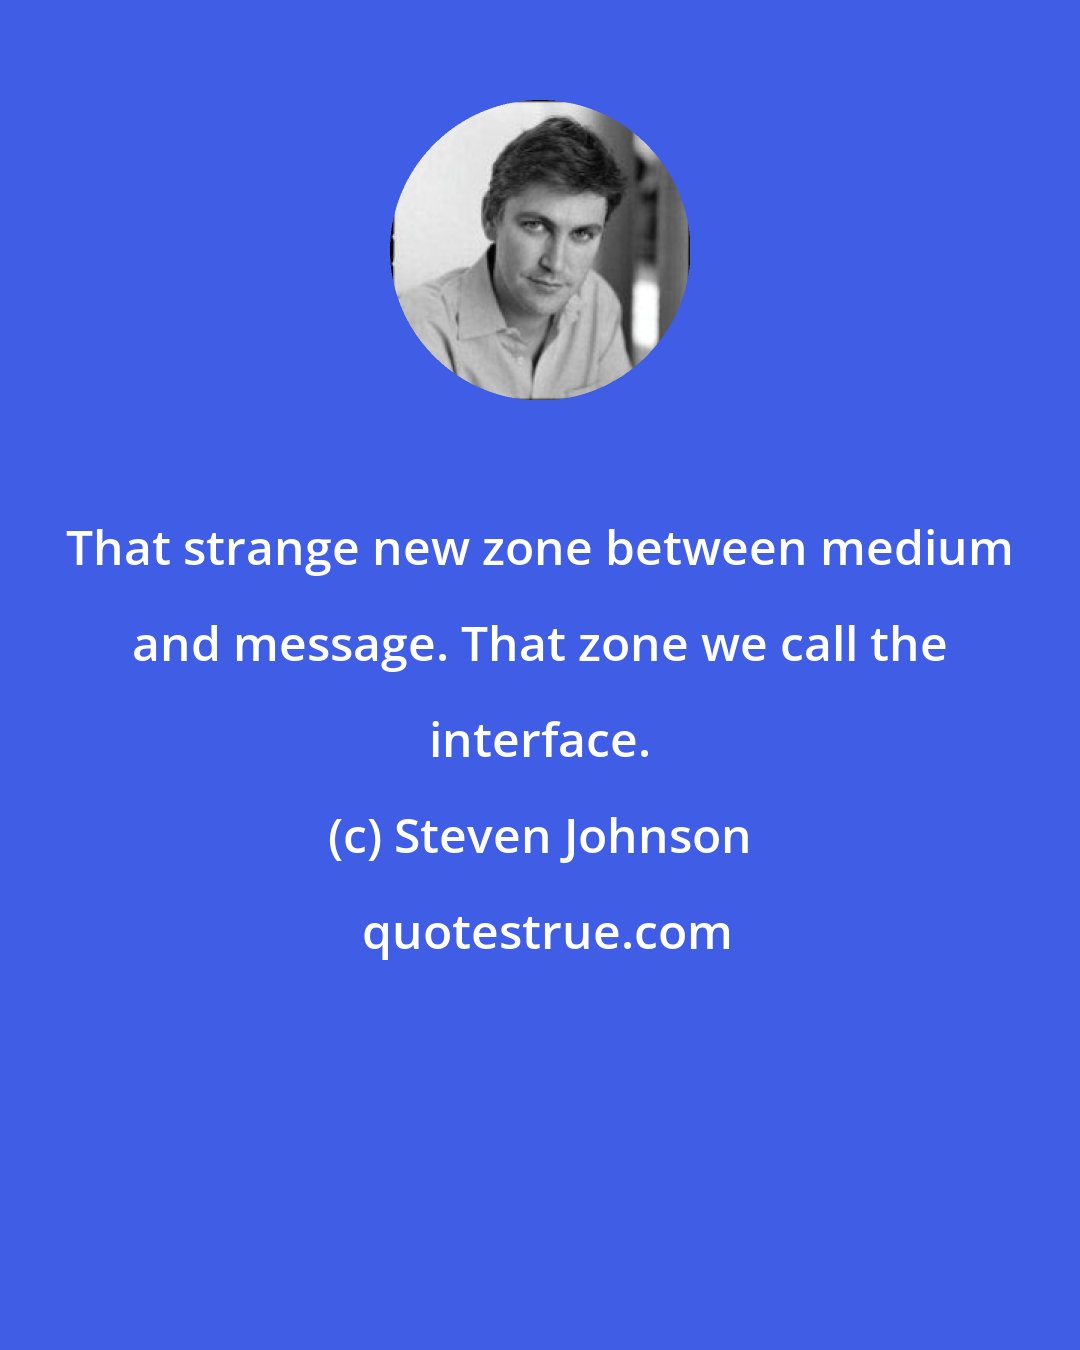 Steven Johnson: That strange new zone between medium and message. That zone we call the interface.